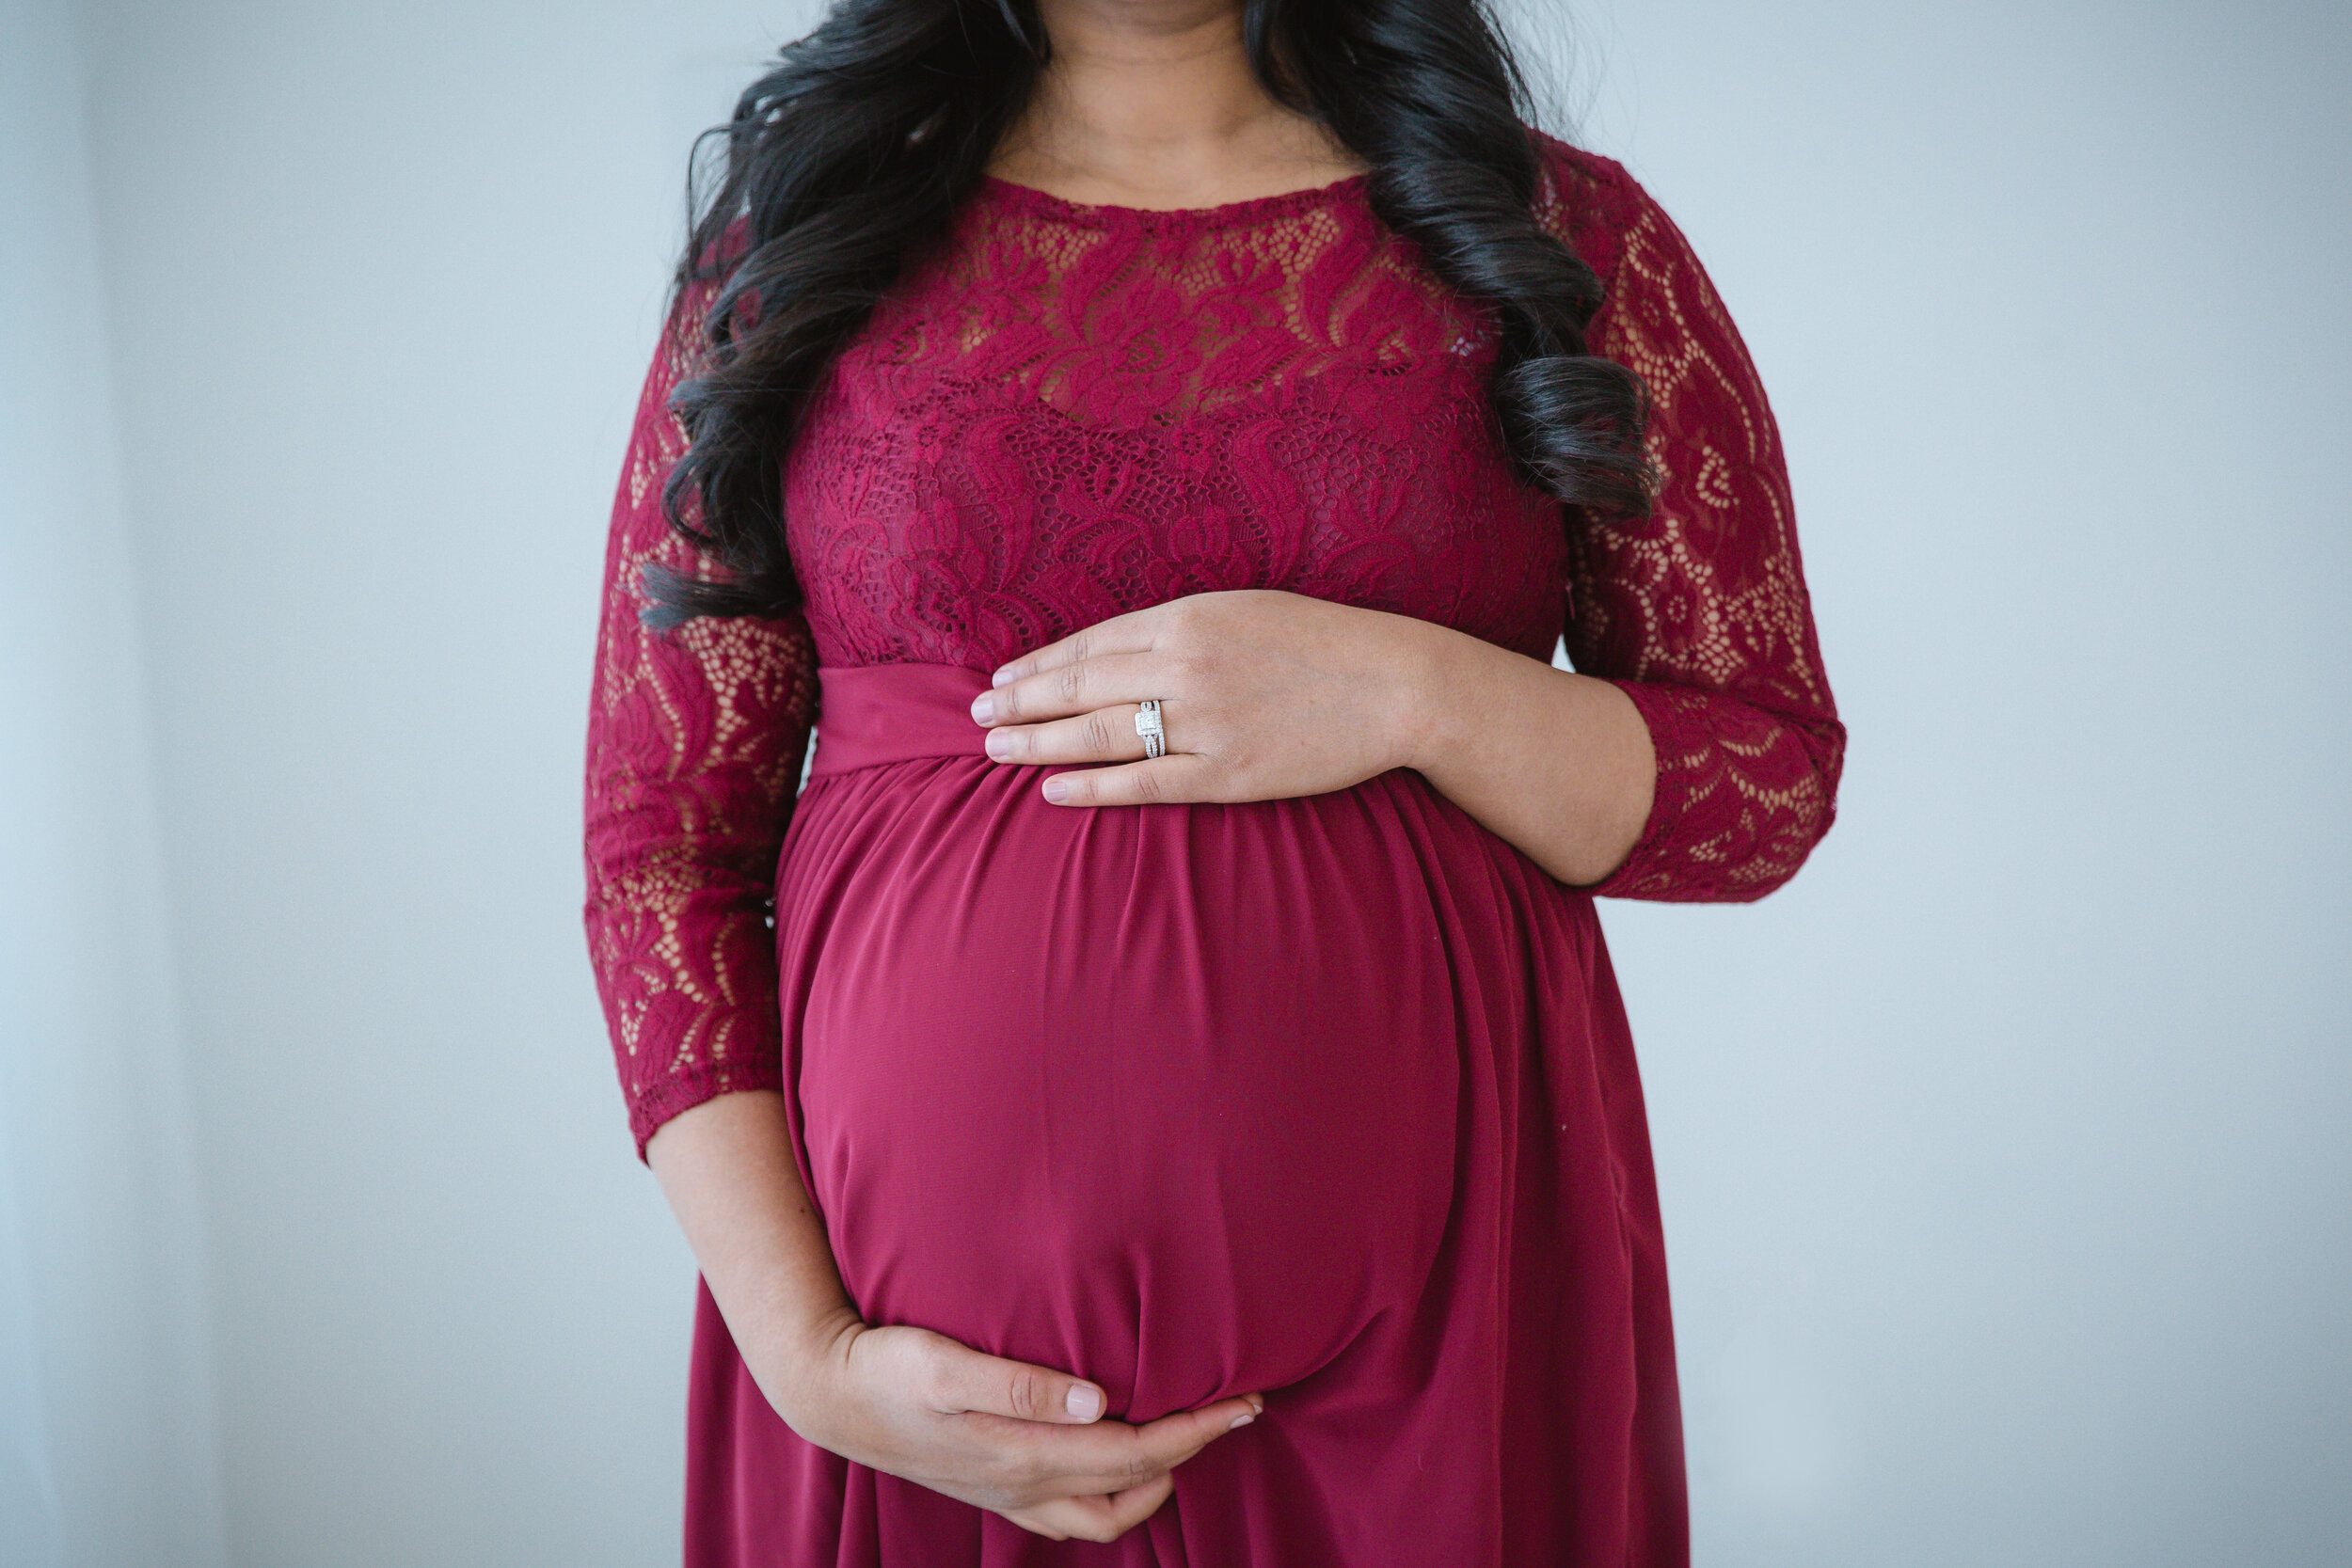 up-close-hands-on belly-maternity-photo.jpg